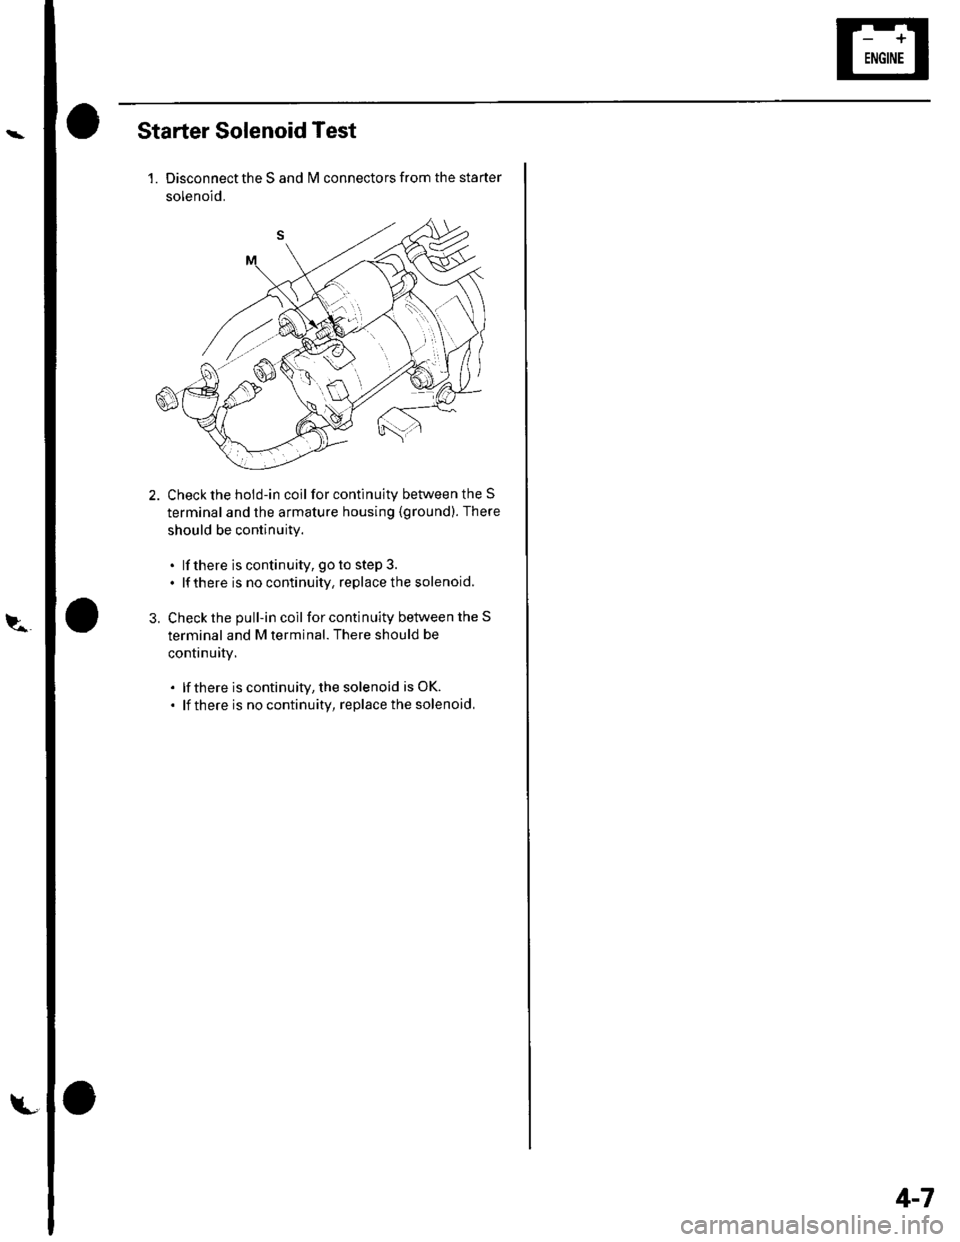 HONDA CIVIC 2003 7.G Workshop Manual et
Starter Solenoid Test
1. Disconnect the S and lvl connectors from the starter
solenoid.
2. Check the hold-in coil for continuity between the S
terminal and the armature housing (ground). There
shou